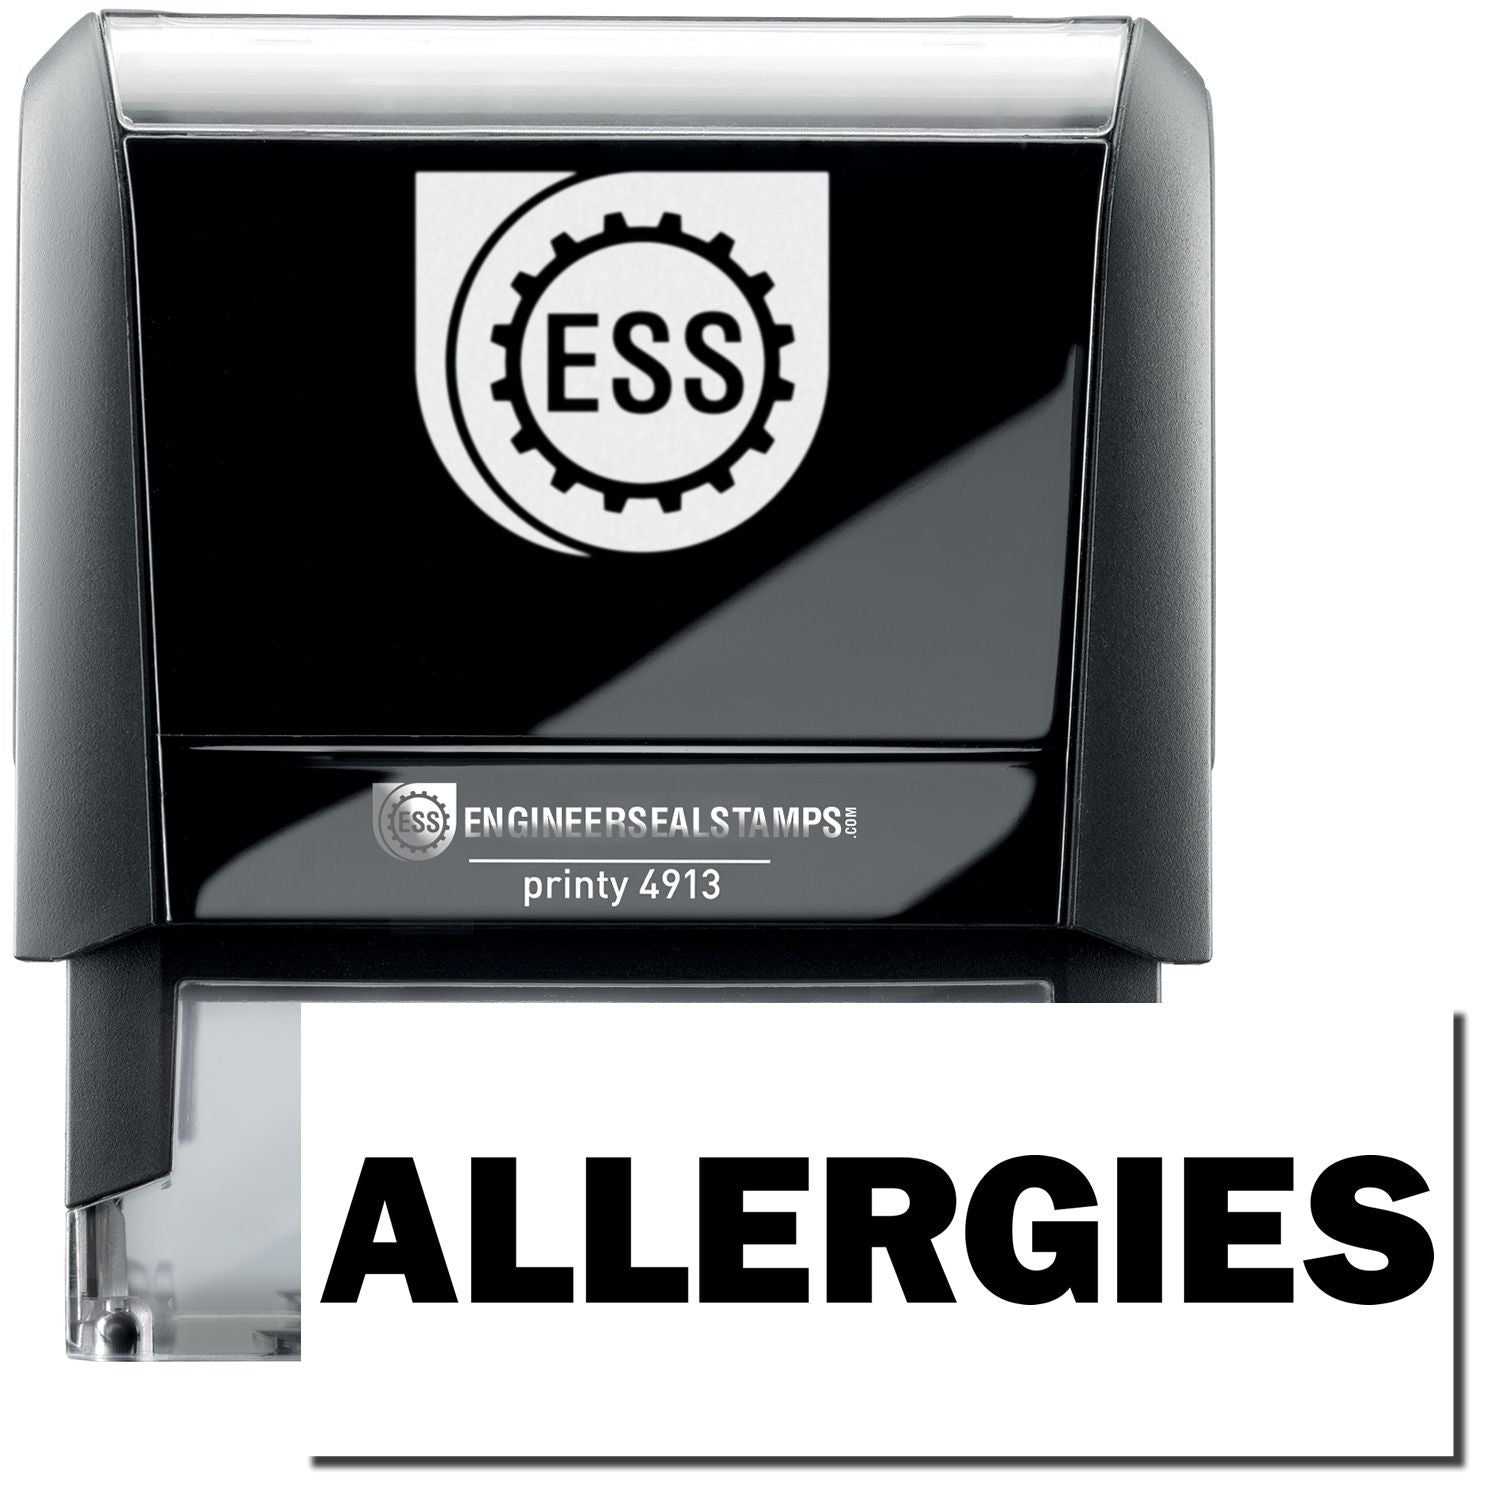 A self-inking stamp with a stamped image showing how the text "ALLERGIES" in a large font is displayed by it after stamping.